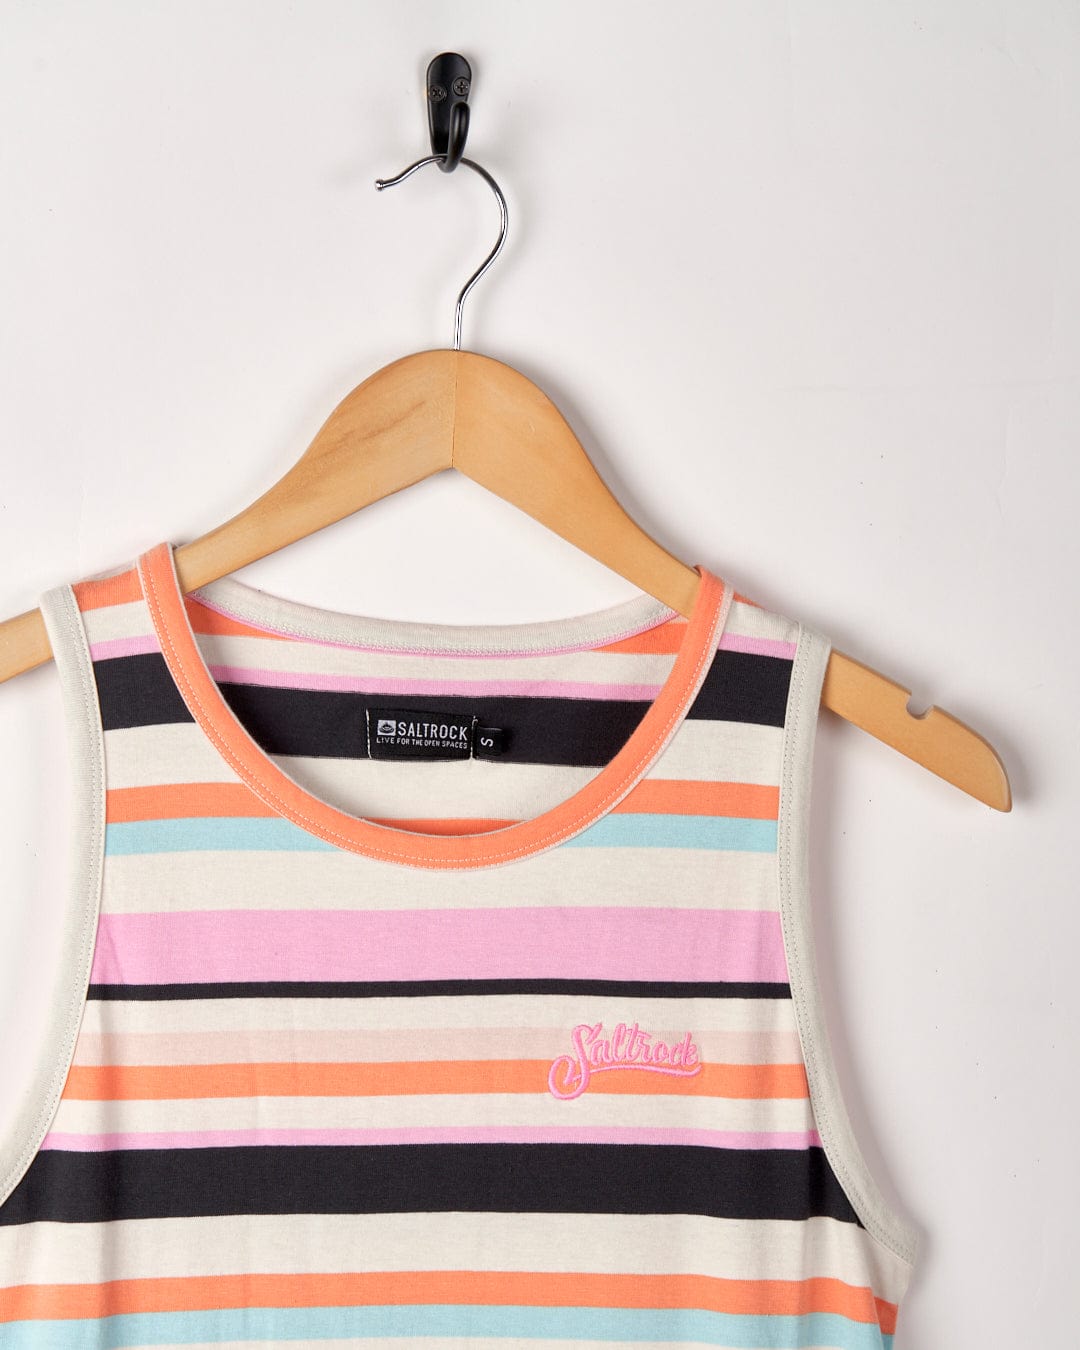 Colorful striped Juno midi dress on a wooden hanger against a white background. The dress features pink, orange, and gray stripes with a visible Saltrock label and an embroidered palm tree.